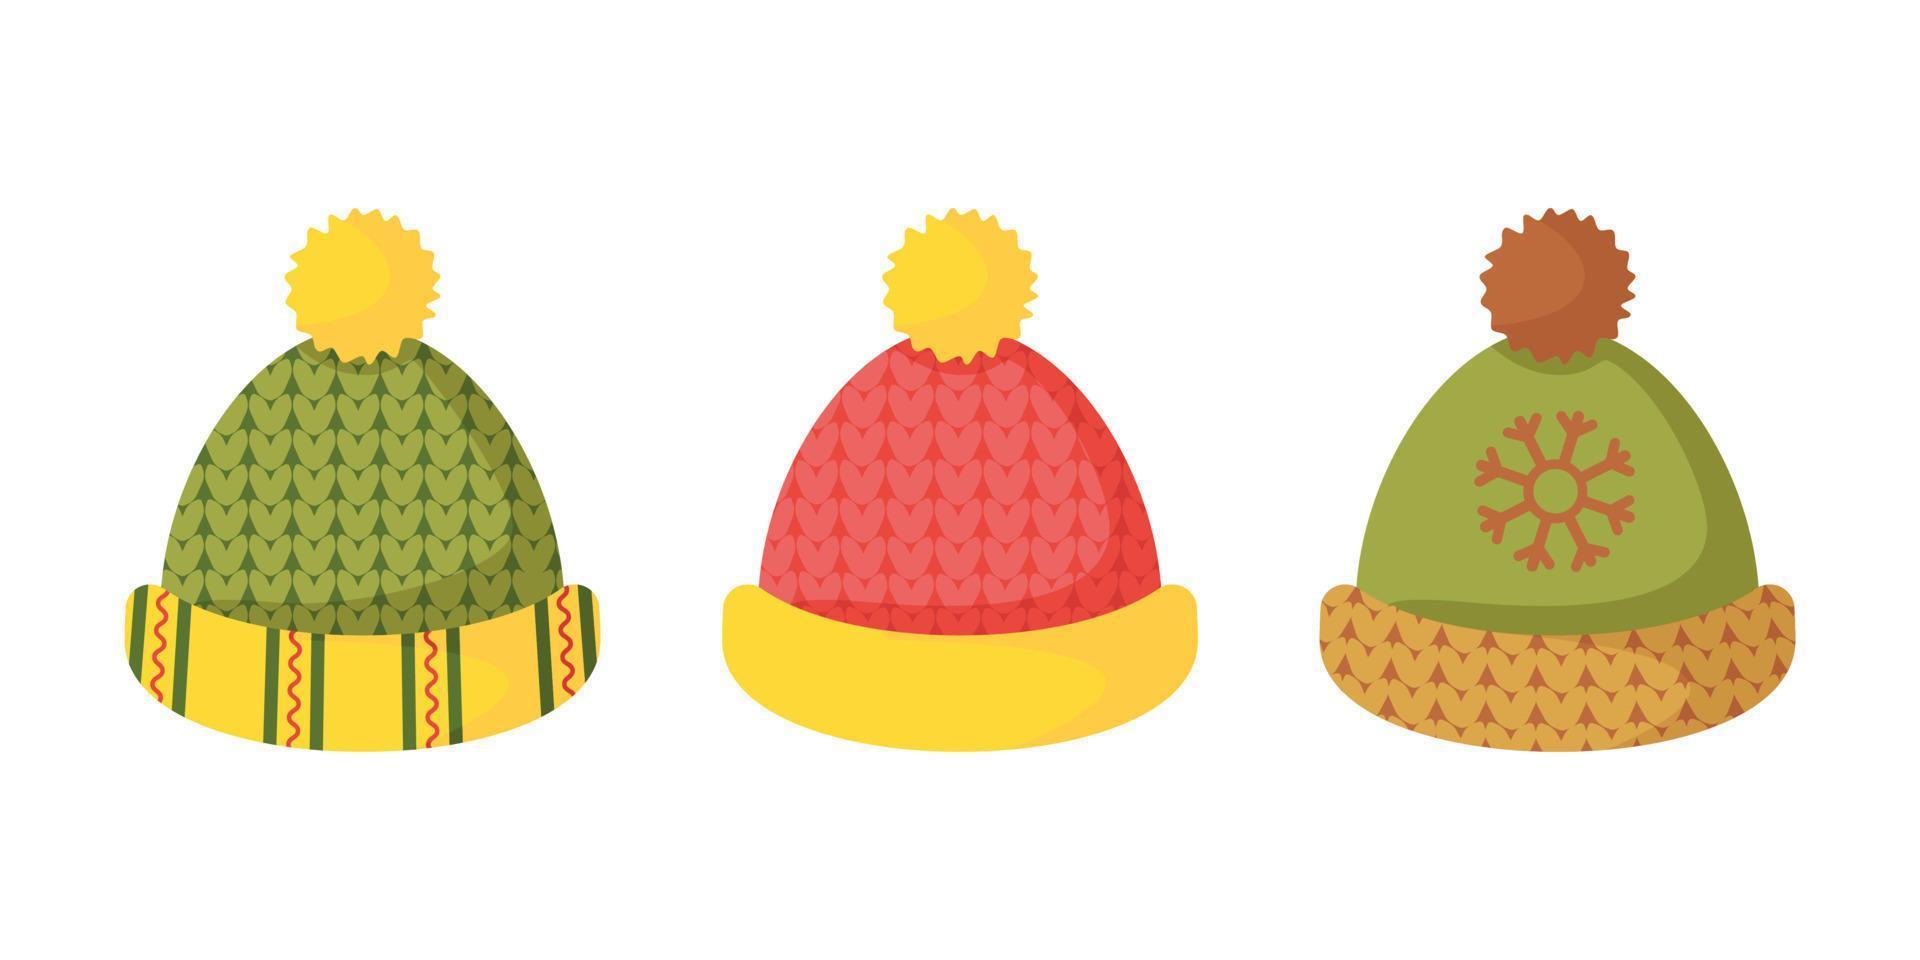 Fashionable, modern, winter, autumn knitted warm hats with patterns, pom poms. Hats for children, youth, women. Winter clothes. Christmas accessory. Set of caps vector